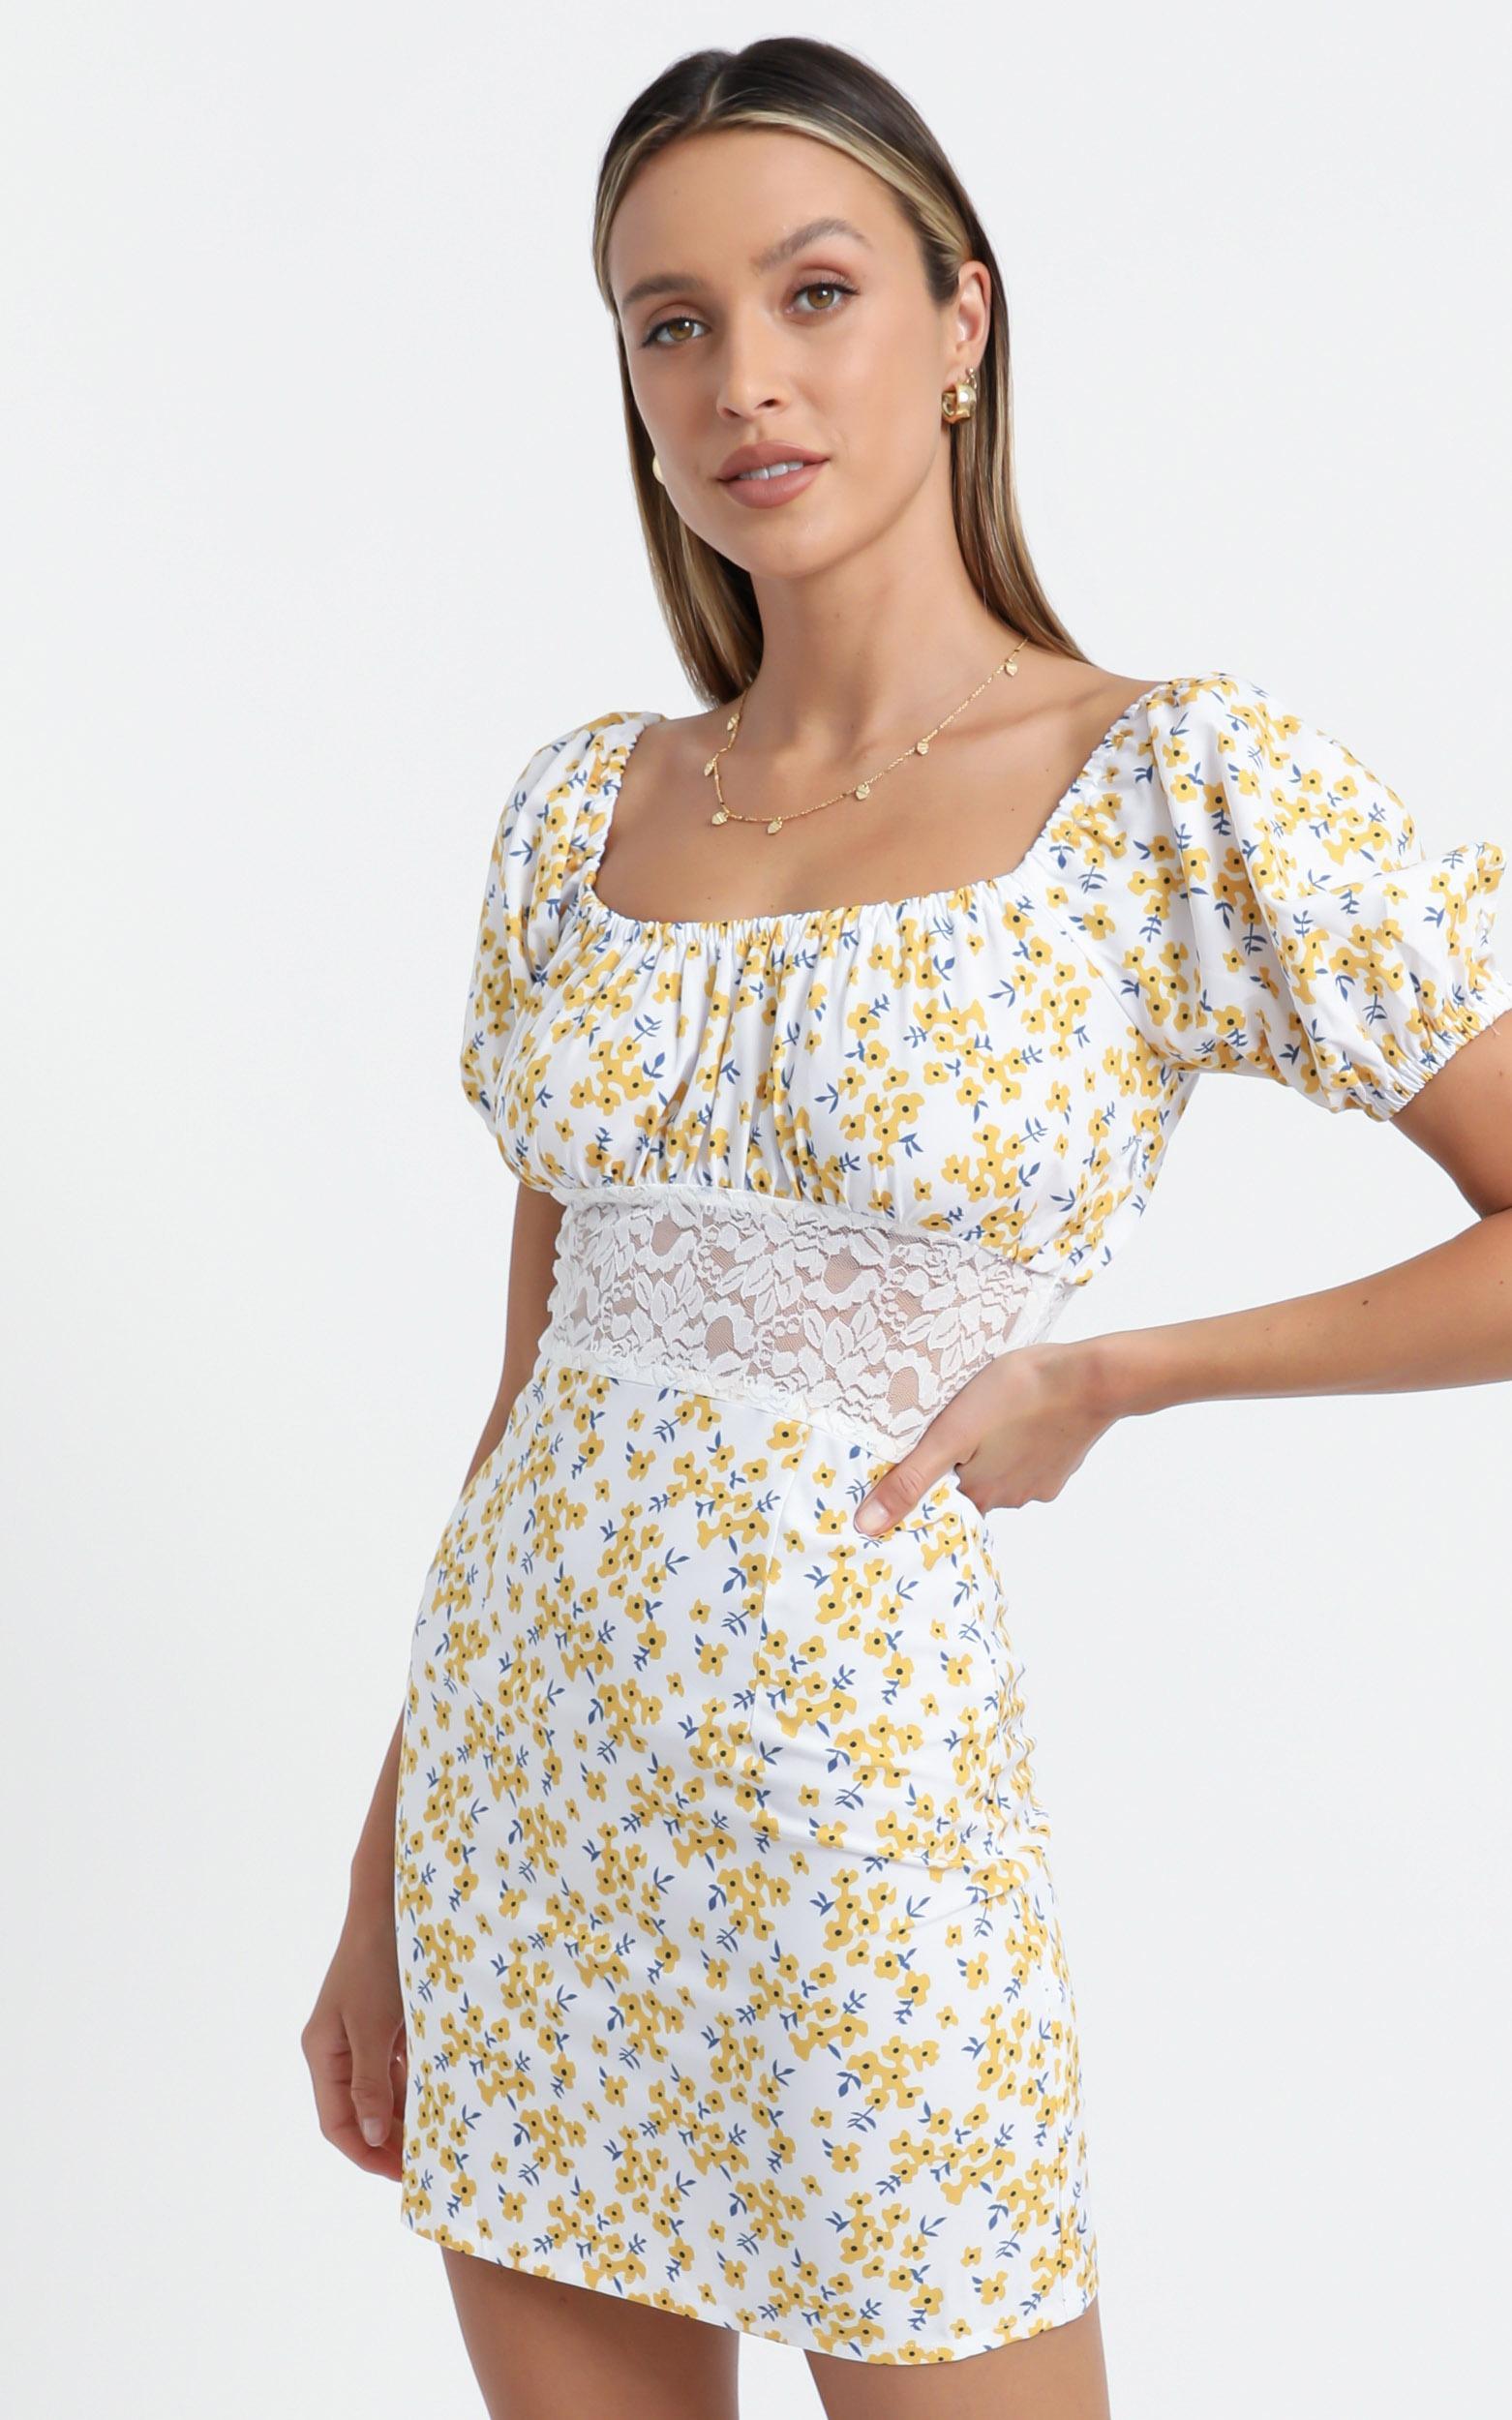 Harwood Two Piece Set in Yellow Floral - 6 (XS), Yellow, hi-res image number null